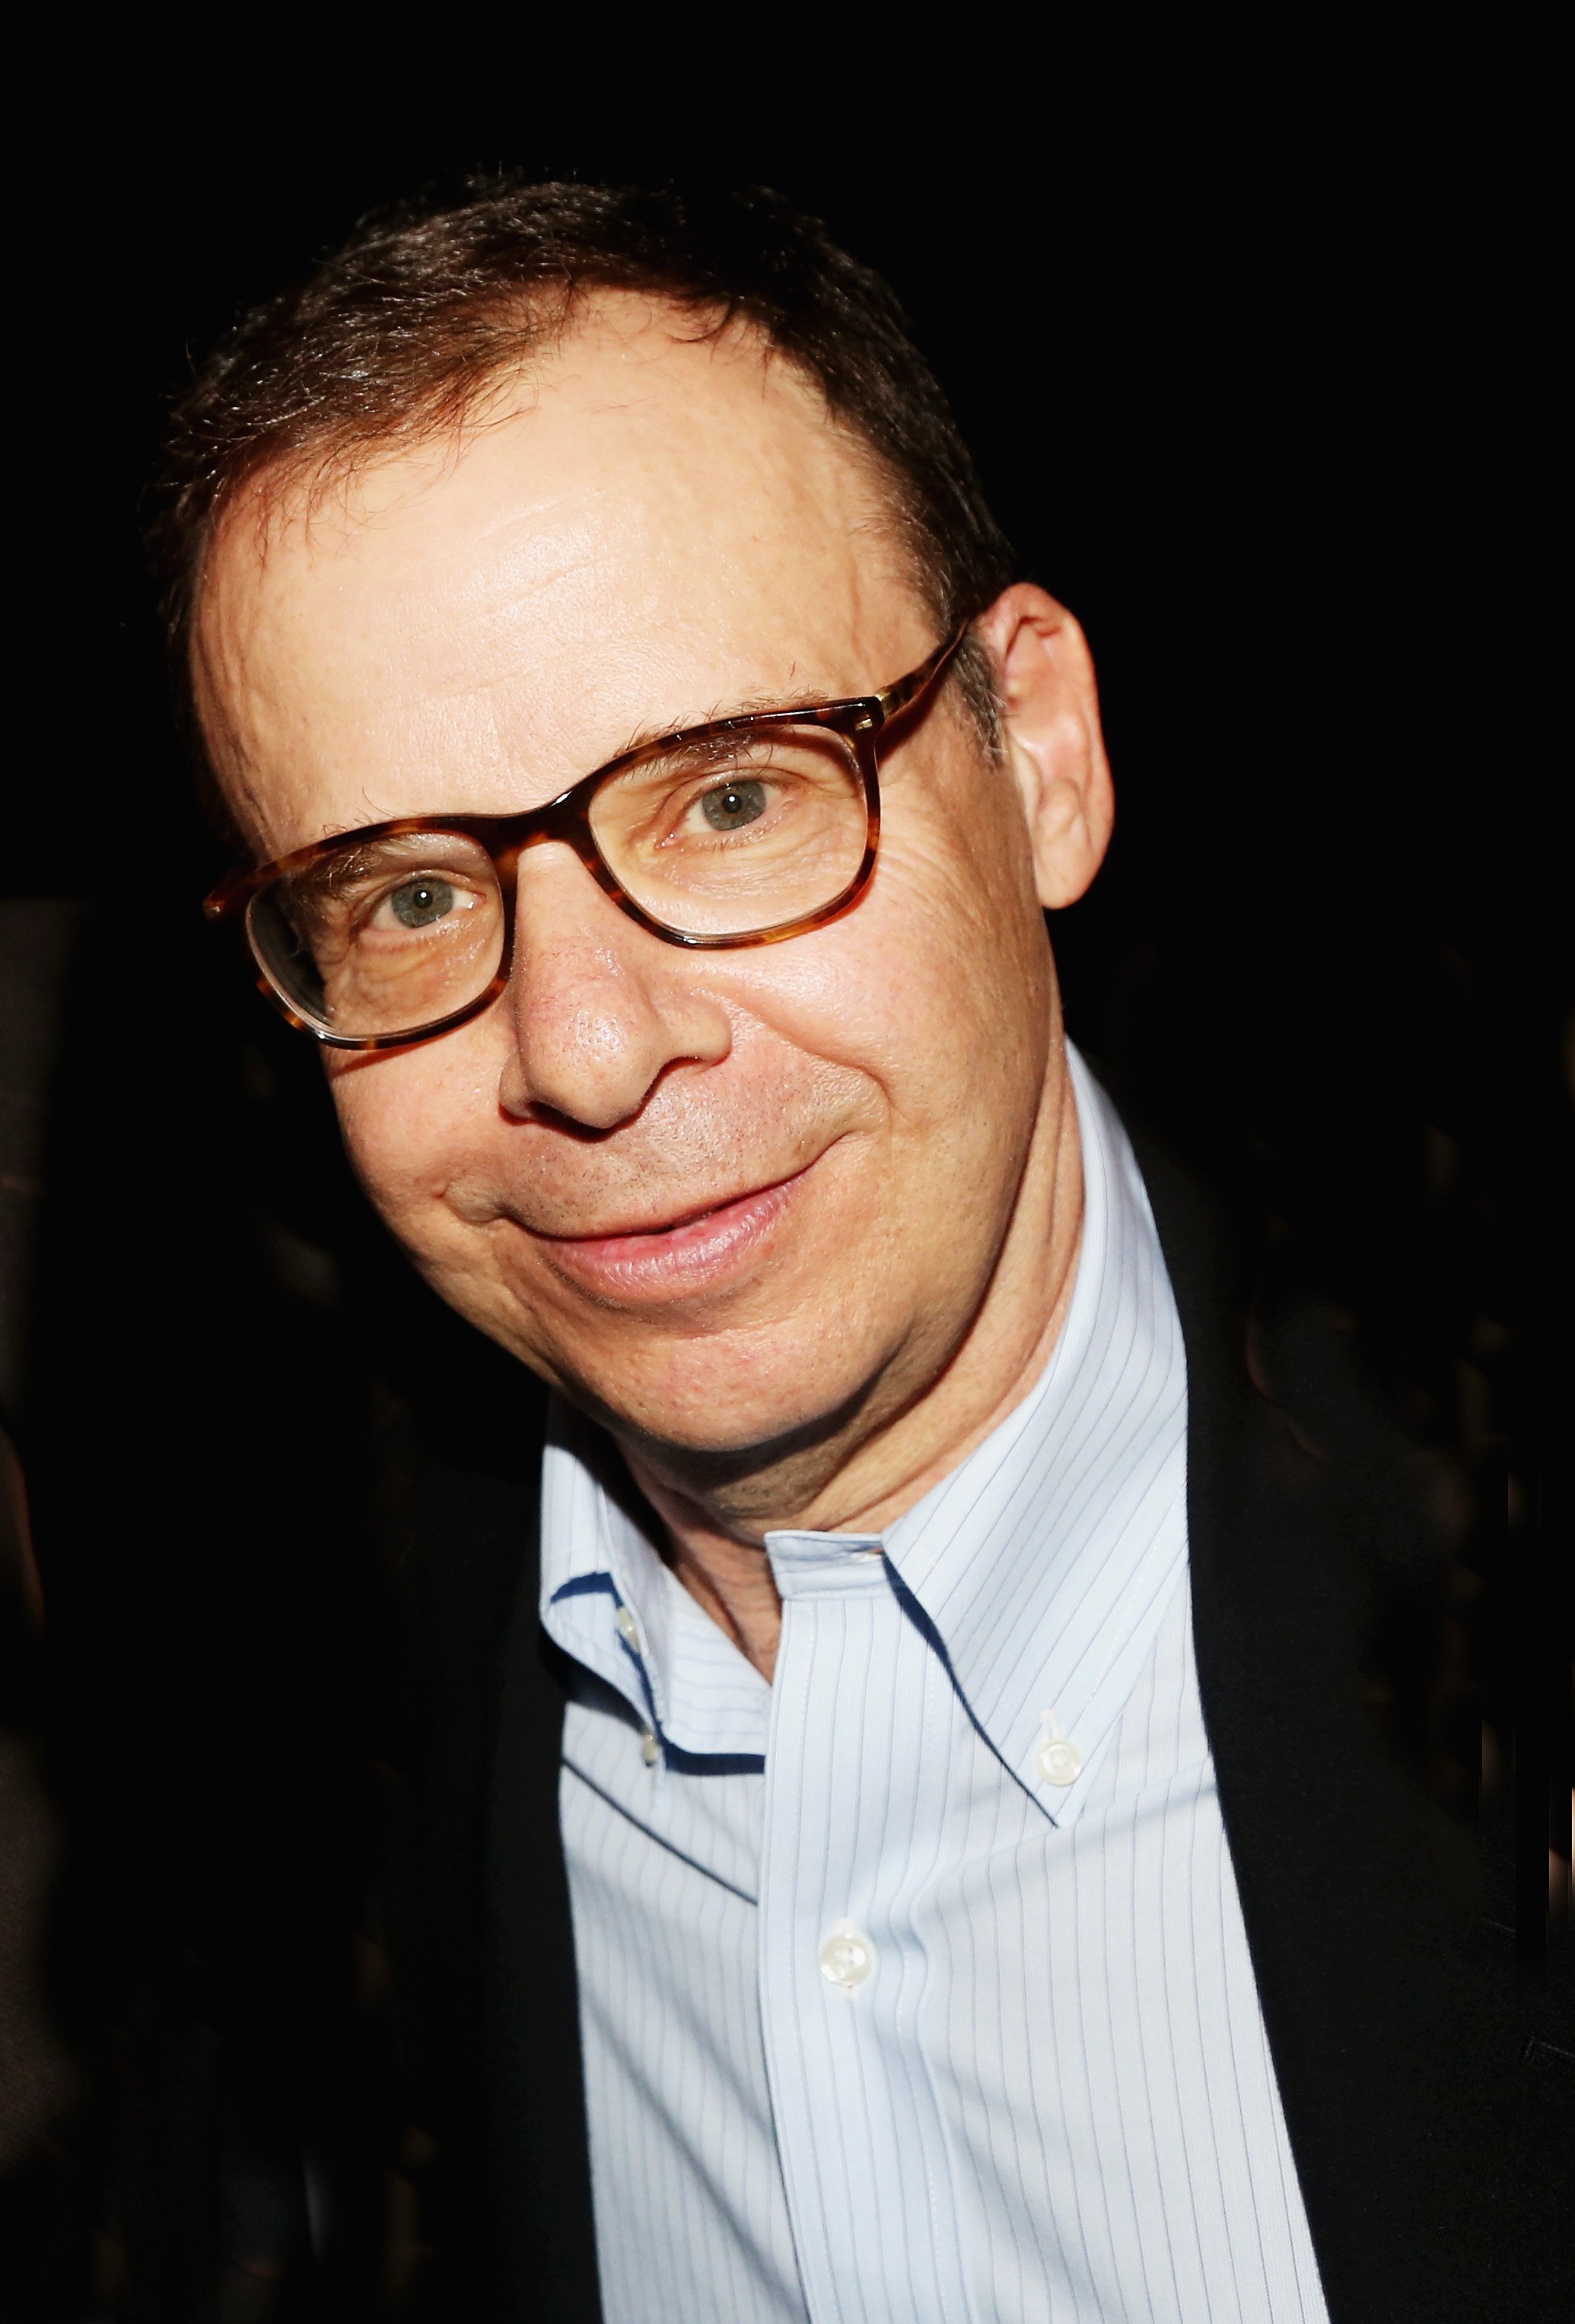 Rick Moranis posing at the opening night after party for "In & Of Itself" at The Ace Hotel on April 12, 2017 in New York City. | Source: Getty Images